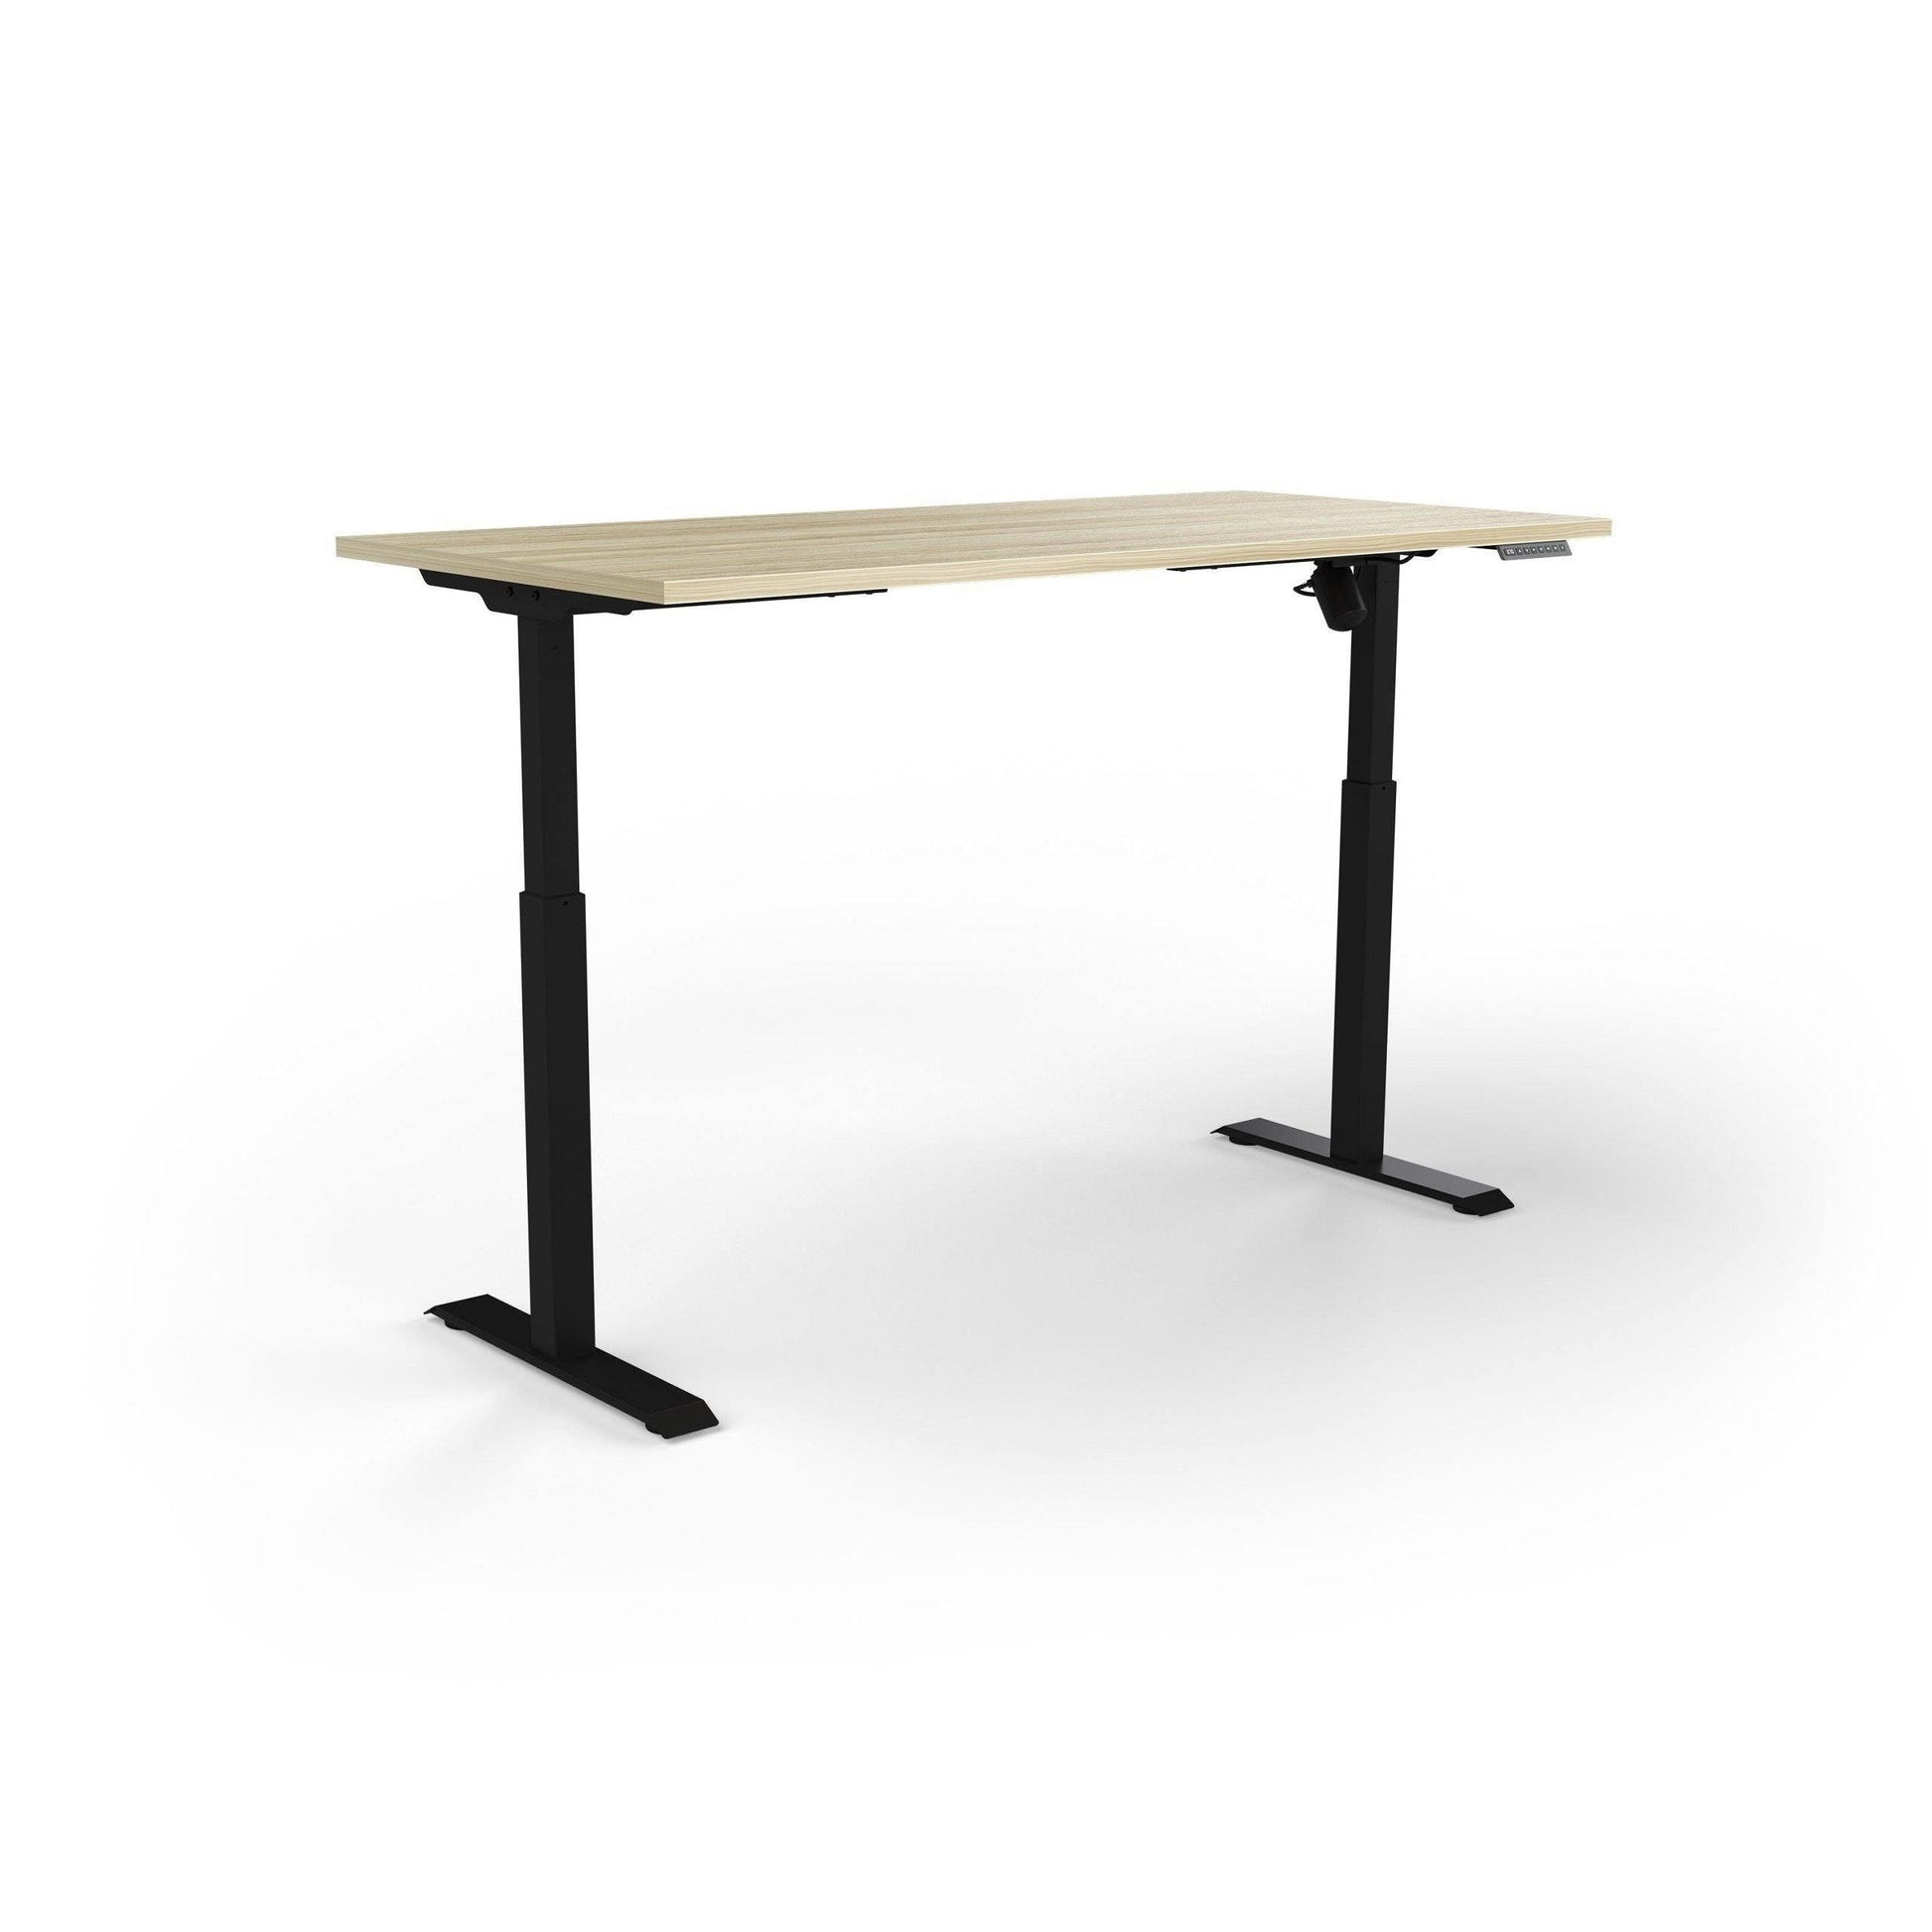 Quick Stand Electric Height Adjustable Desk - Office Furniture Company 